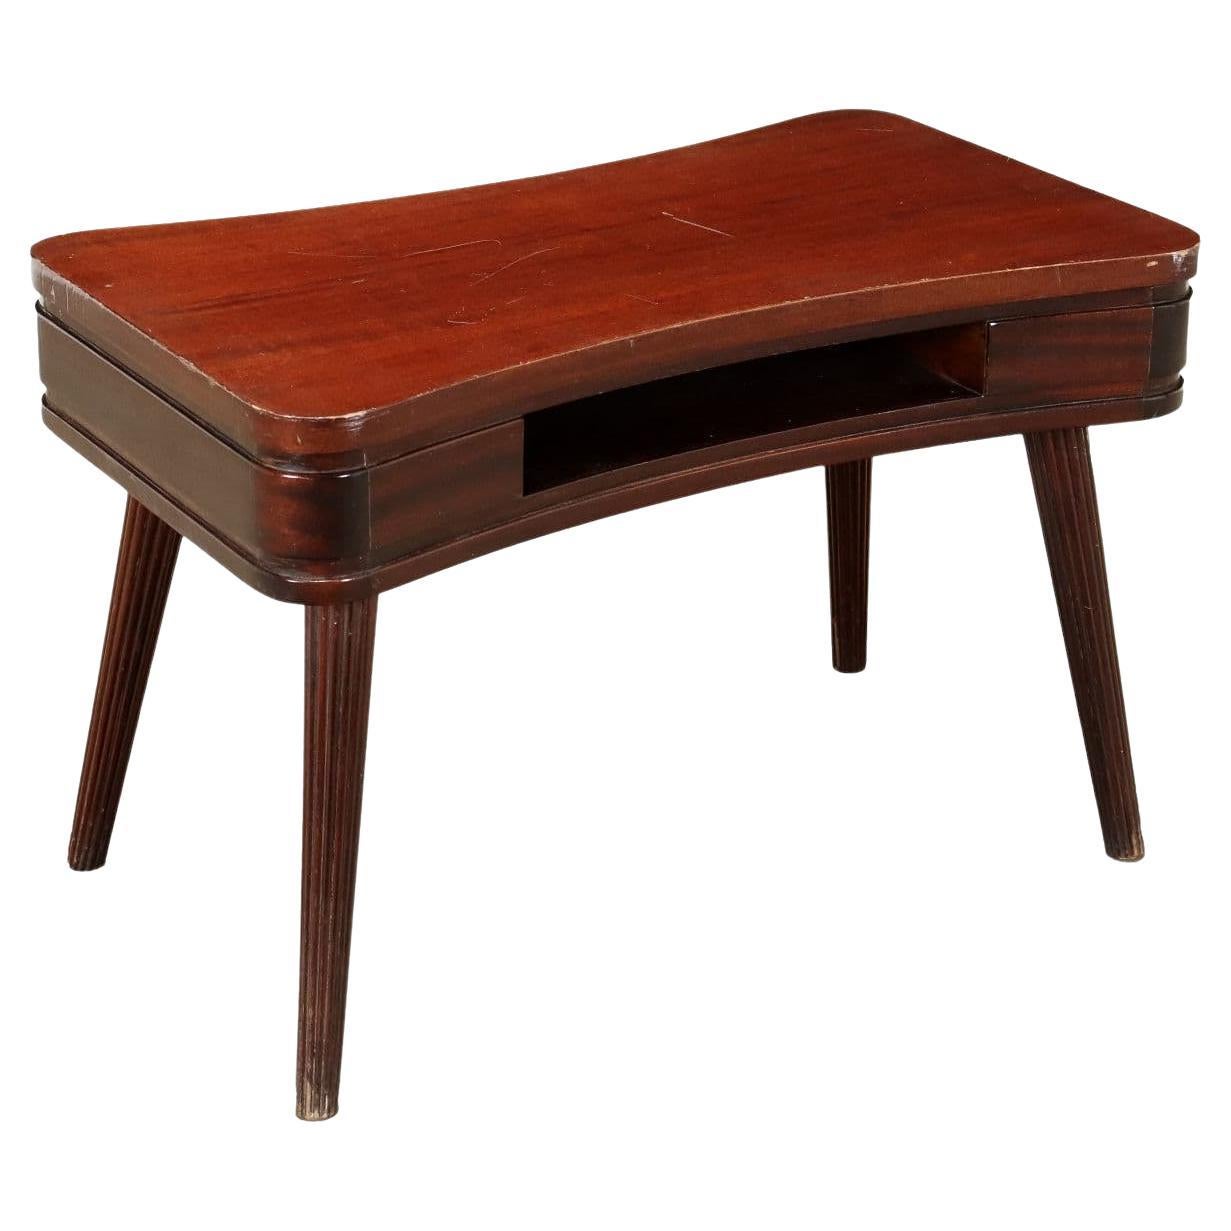 50s-60s Coffee Table For Sale